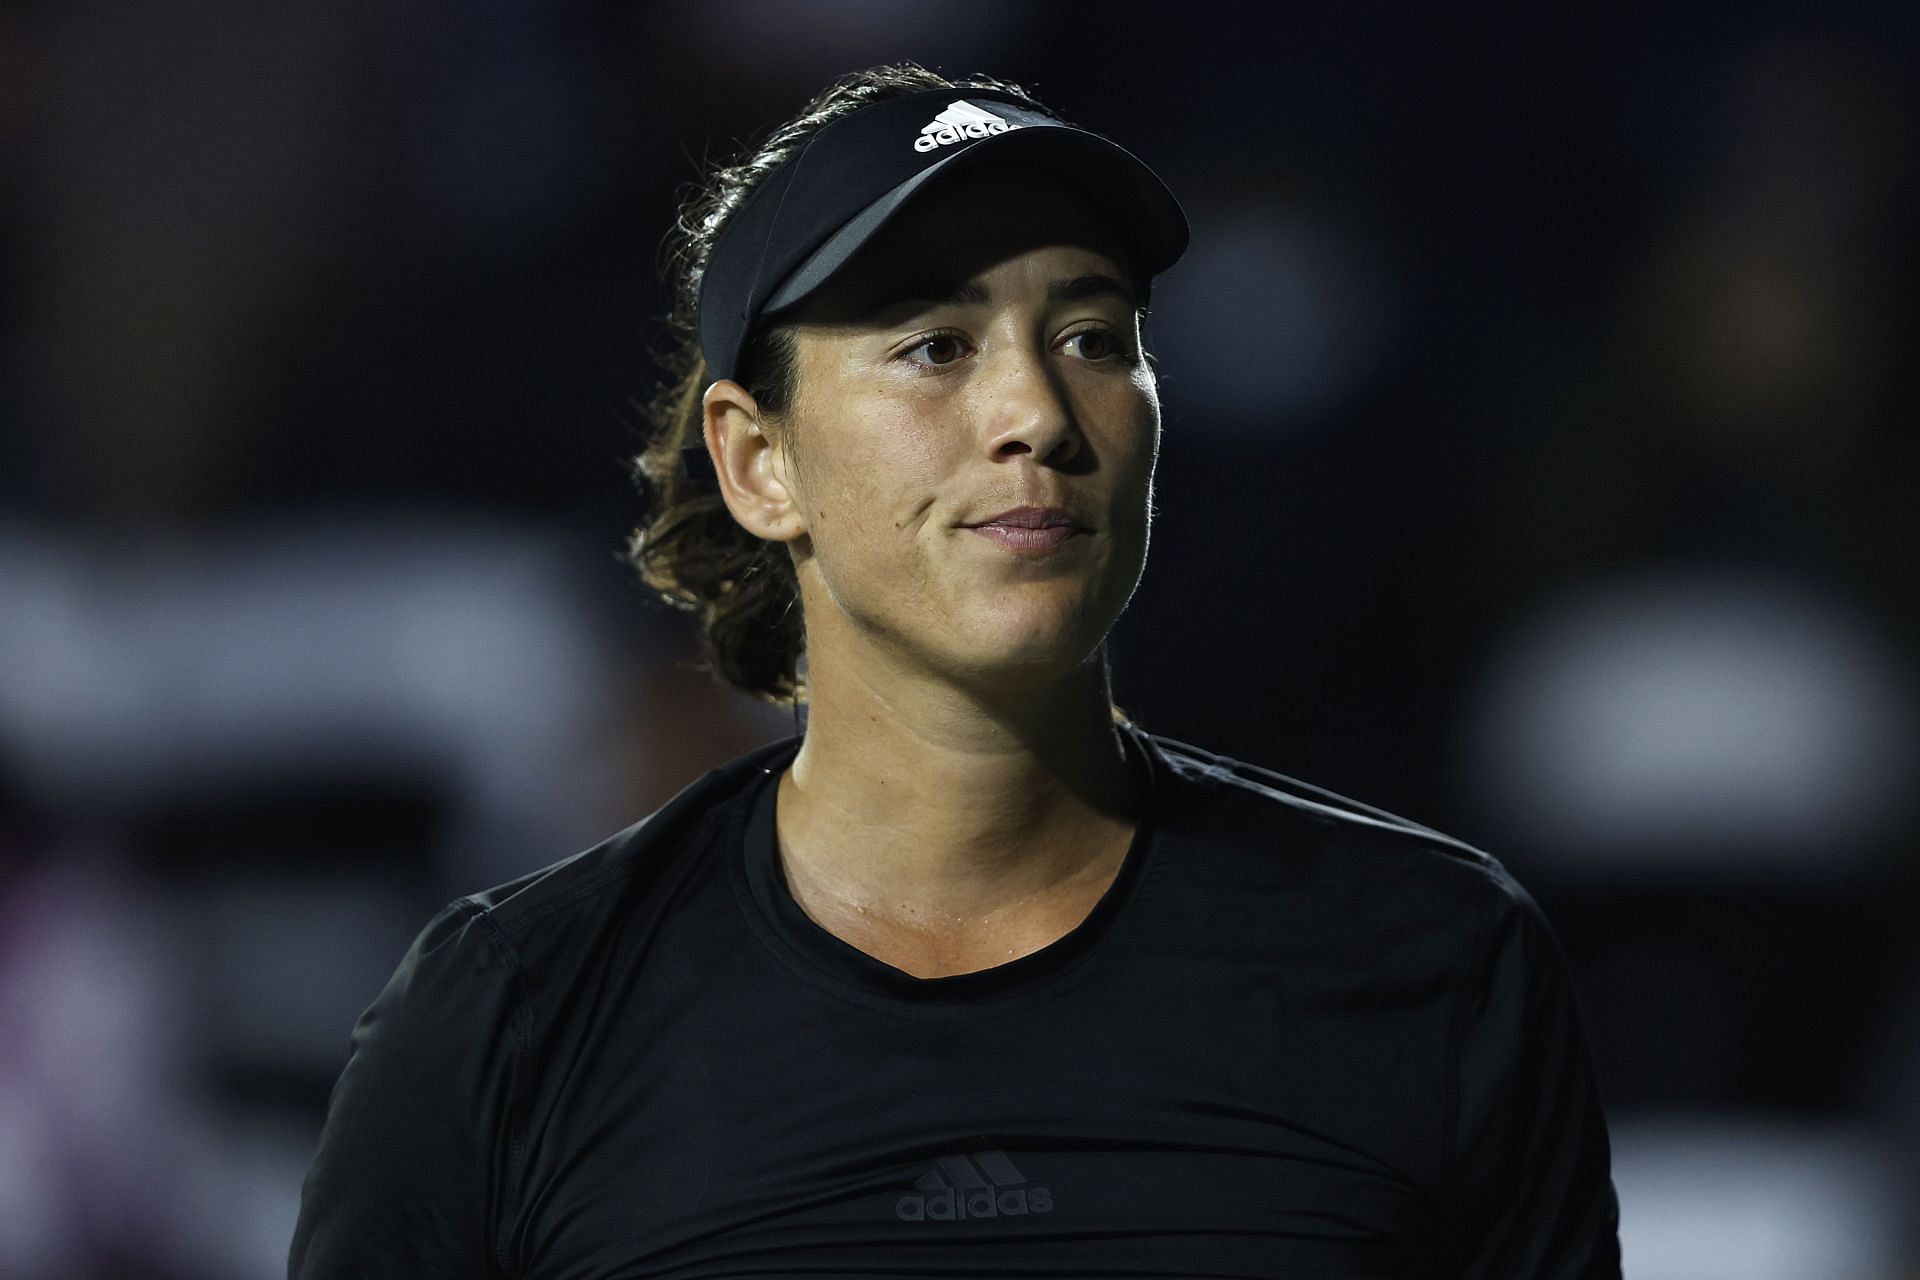 “I let time go by and that’s it” Garbine Muguruza opens up on her